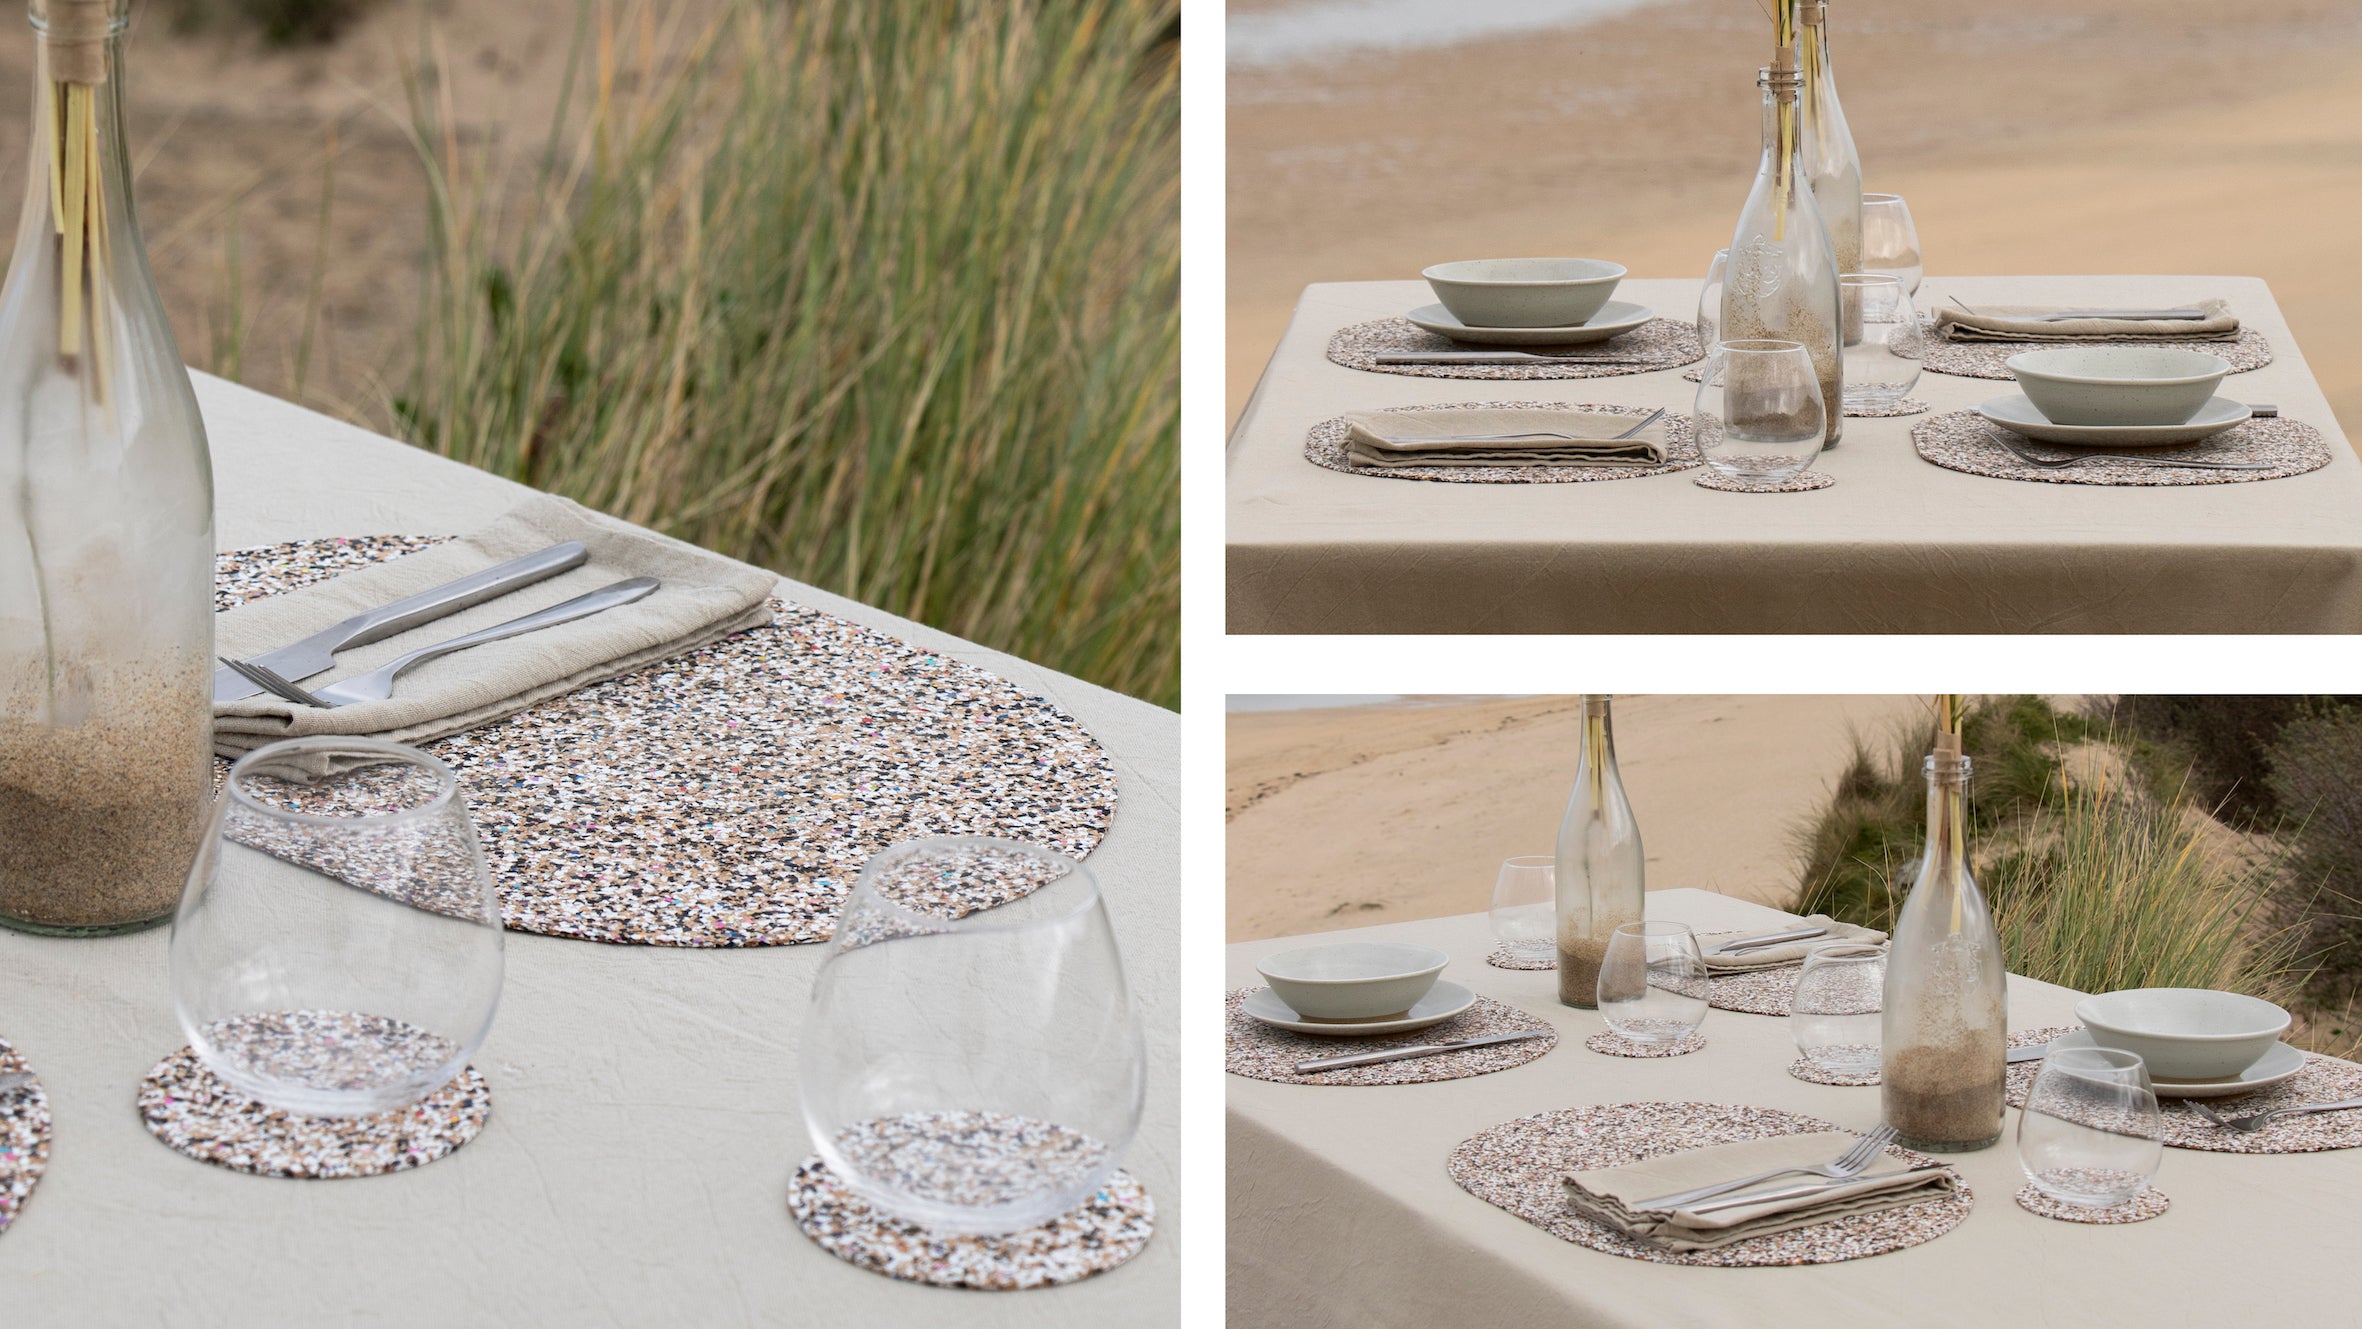 Beach clean placemats set up in a coastal scene